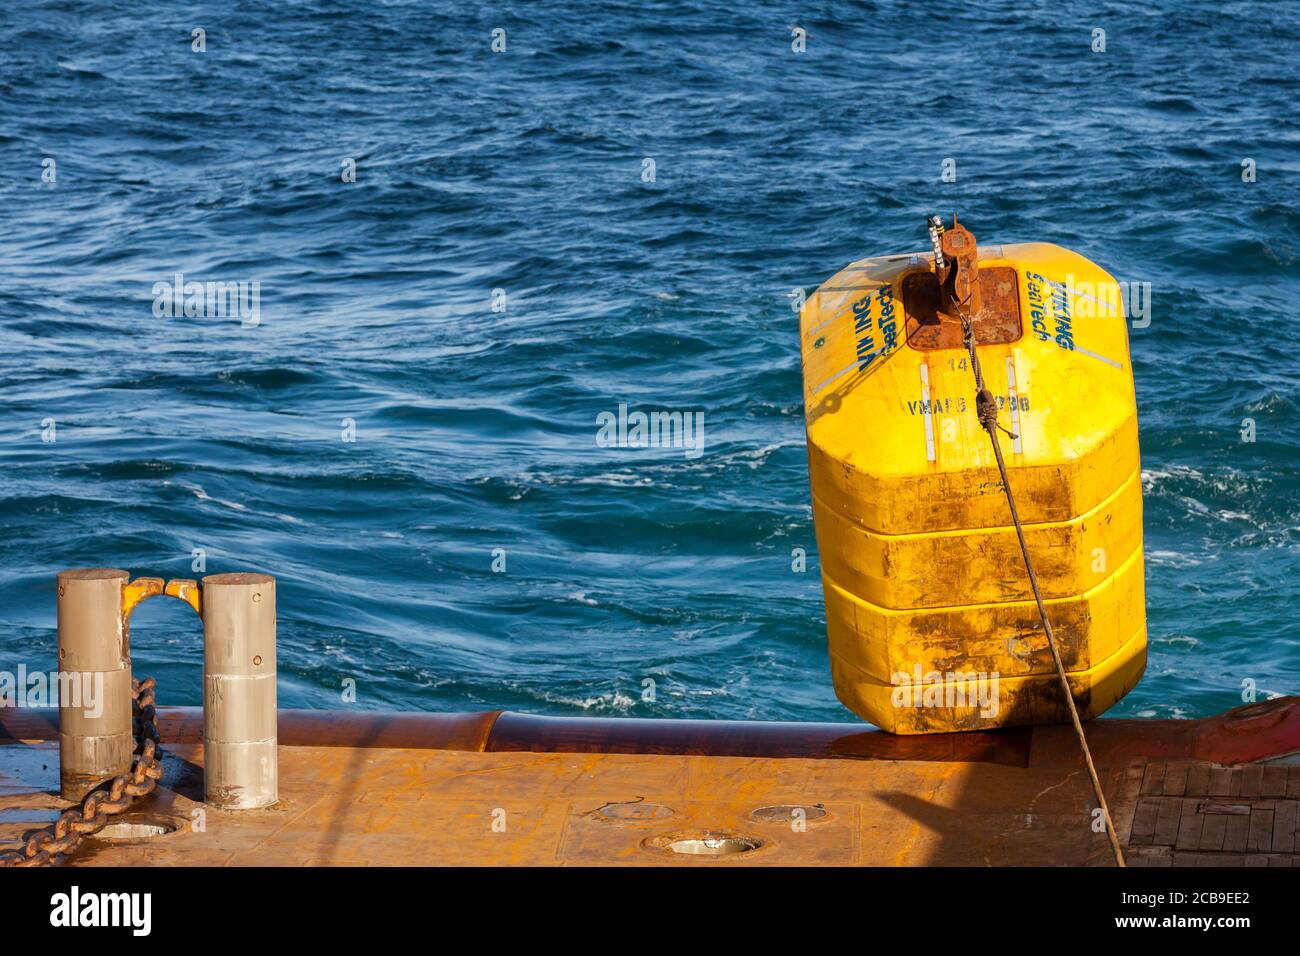 NORTH SEA NORWAY - 2015 MAY 17. Recovery the surface buoy attached to the oil rig anchor line. Stock Photo